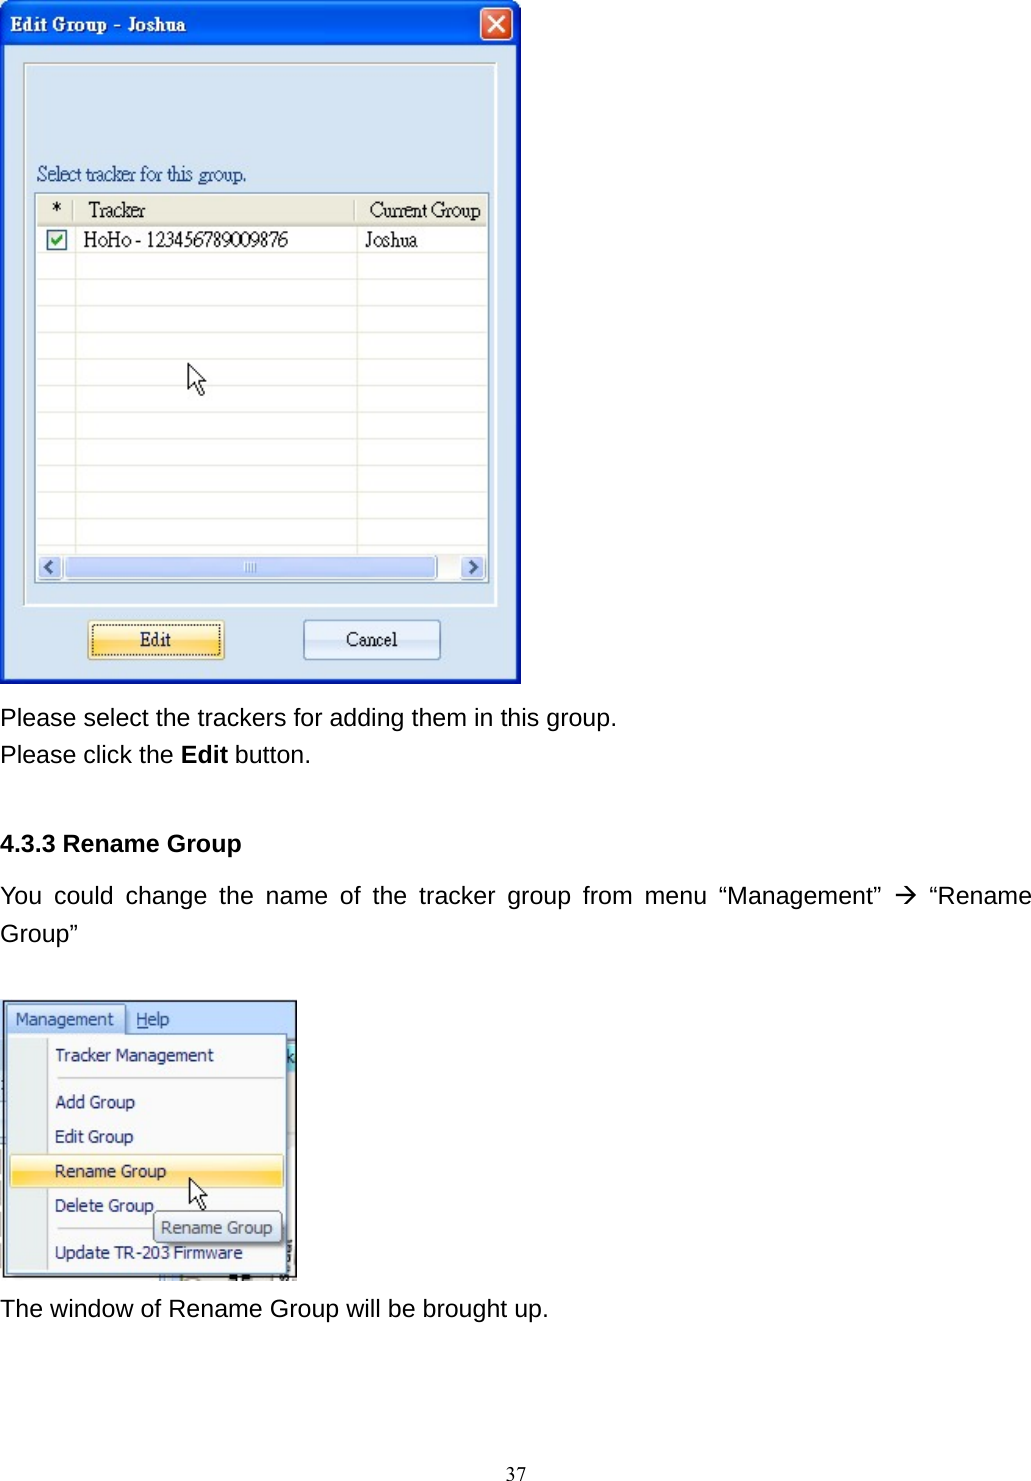  Please select the trackers for adding them in this group. Please click the Edit button.  4.3.3 Rename Group You could change the name of the tracker group from menu “Management” Æ “Rename Group”   The window of Rename Group will be brought up.     37